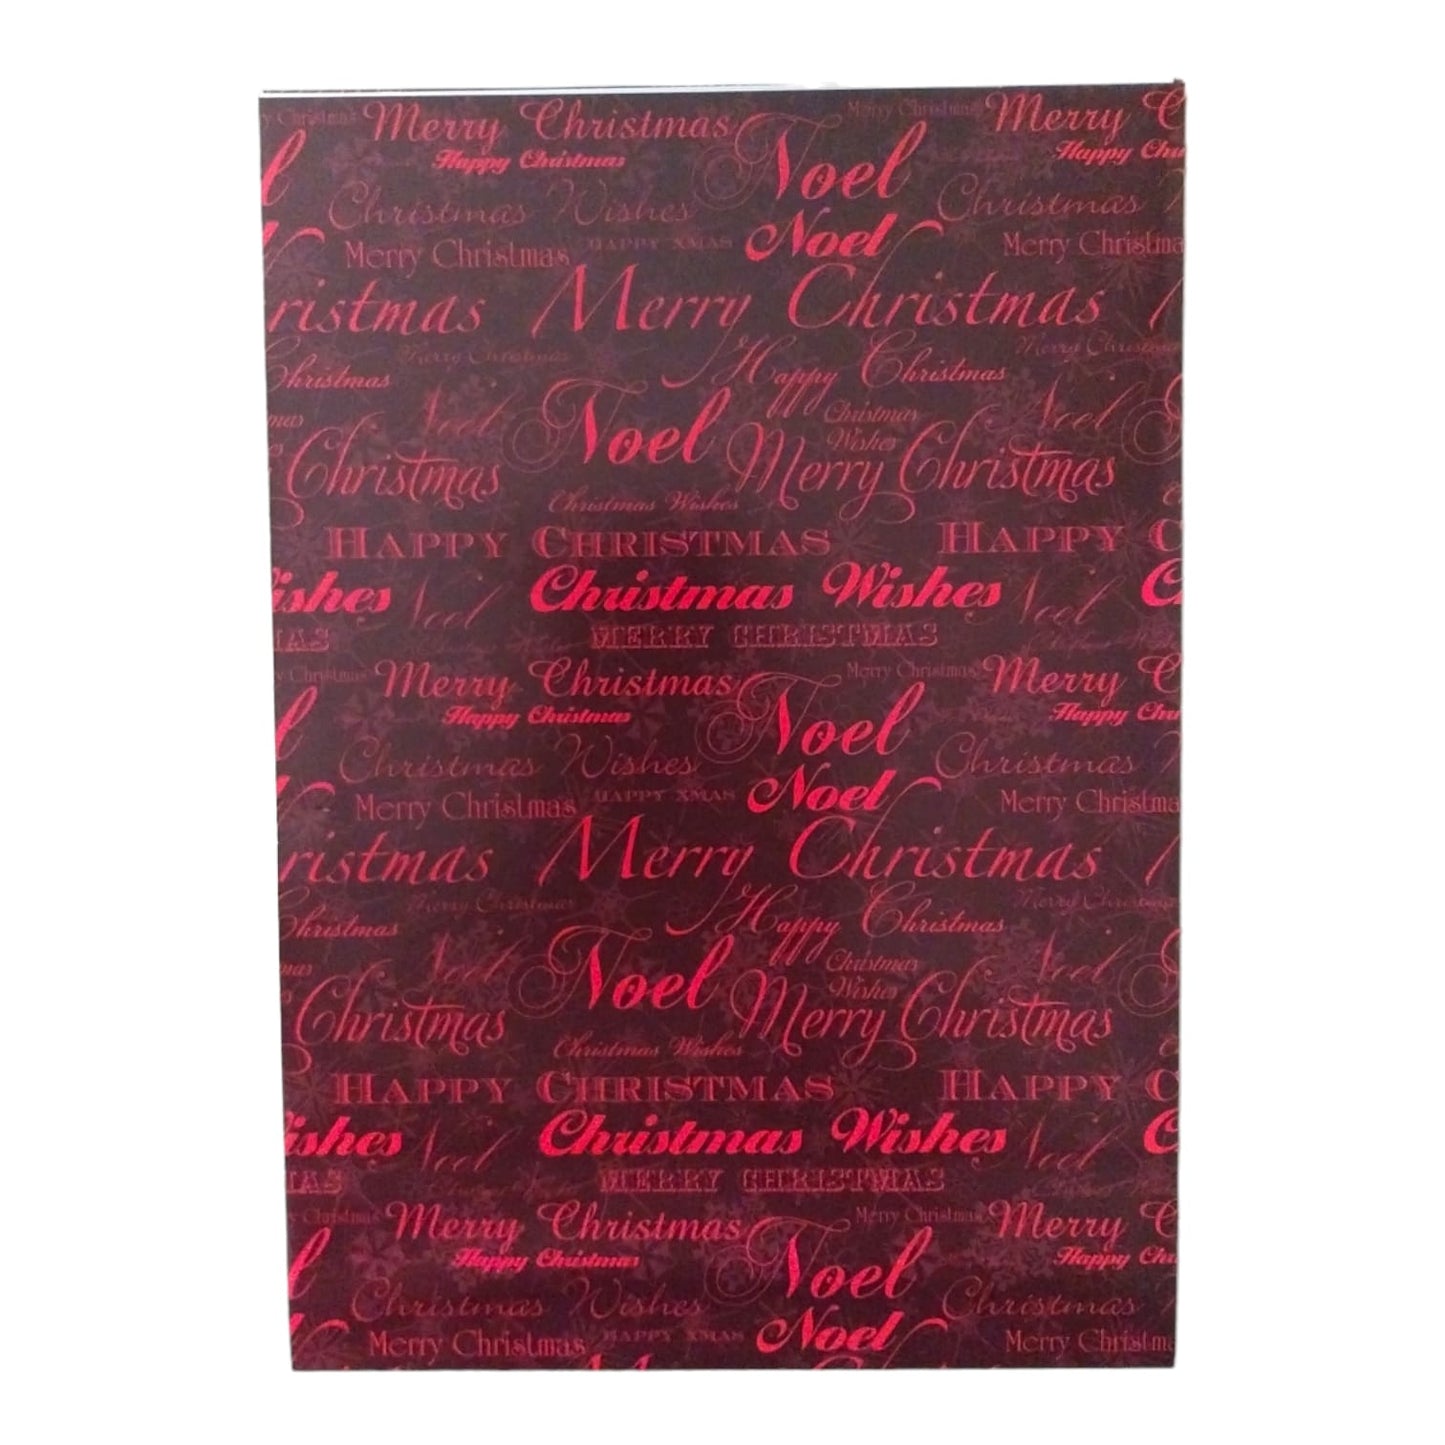 10 Sheets of Luxury Christmas Decoration Design Gift Wrap and Tags